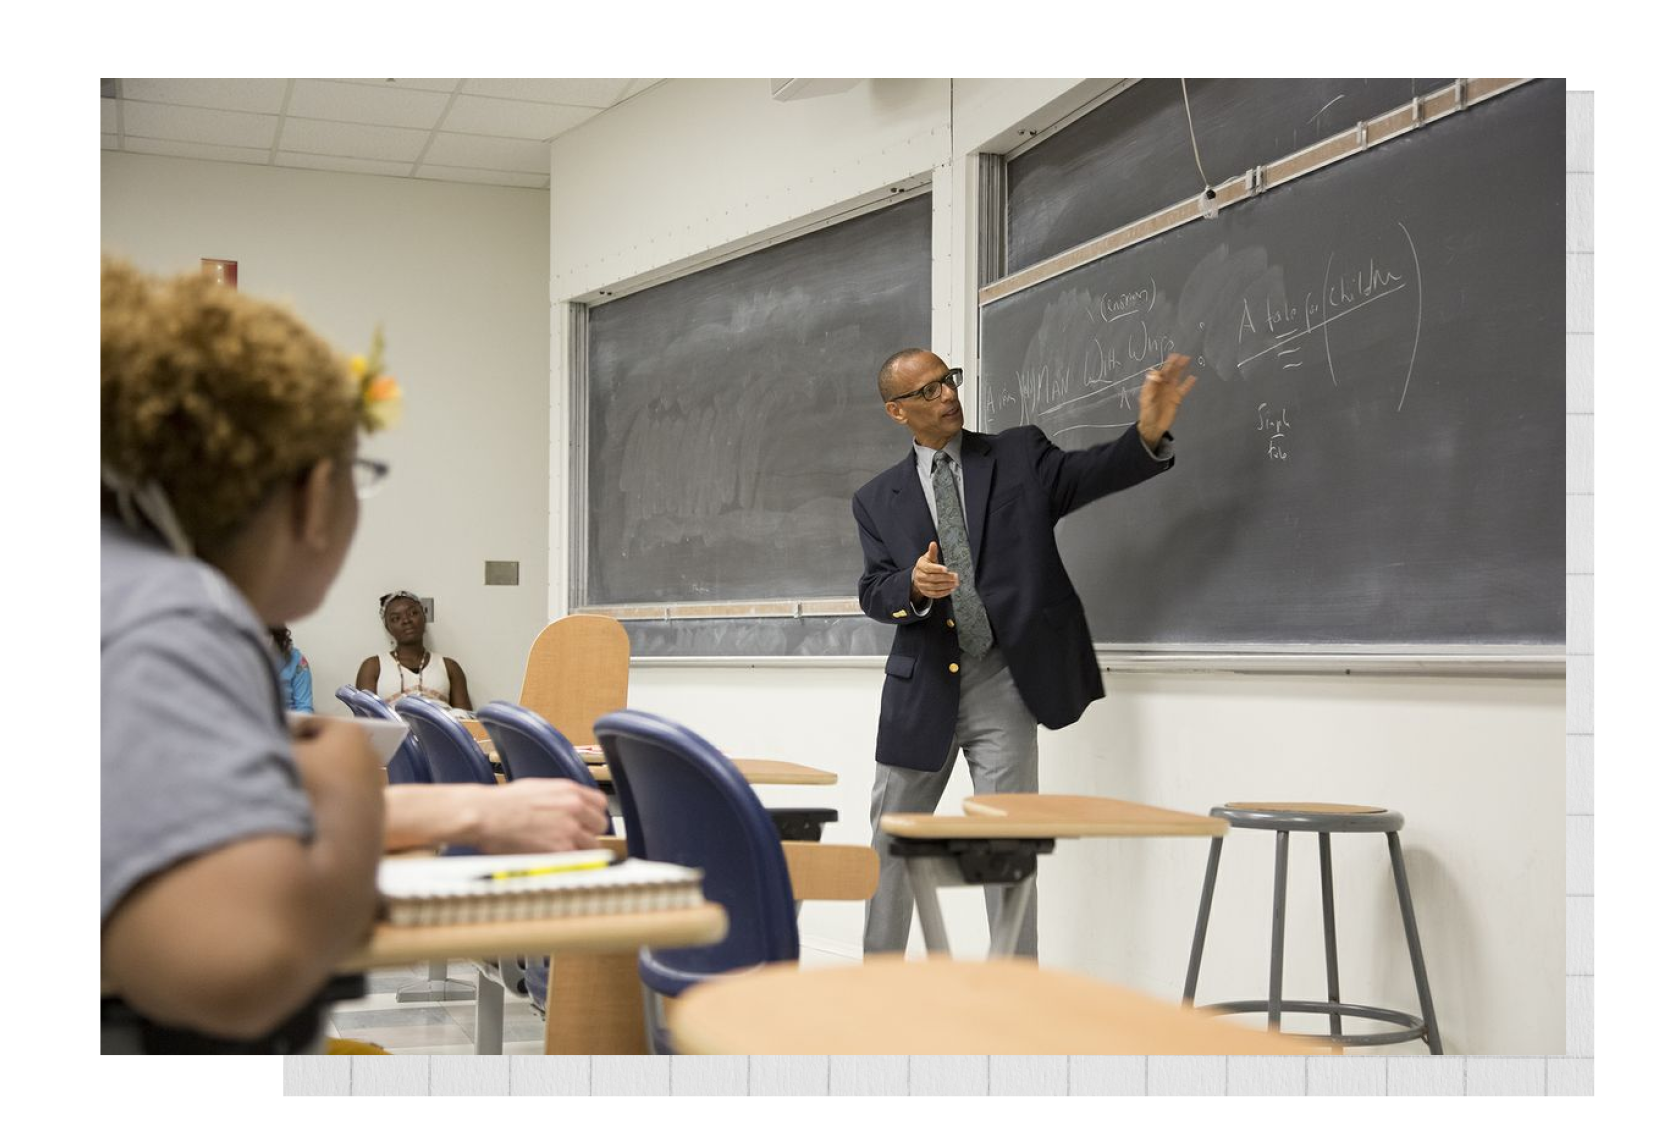 Professor Fred D’Aguiar in a suit and tie teaching to students in a classroom with a chalkboard.